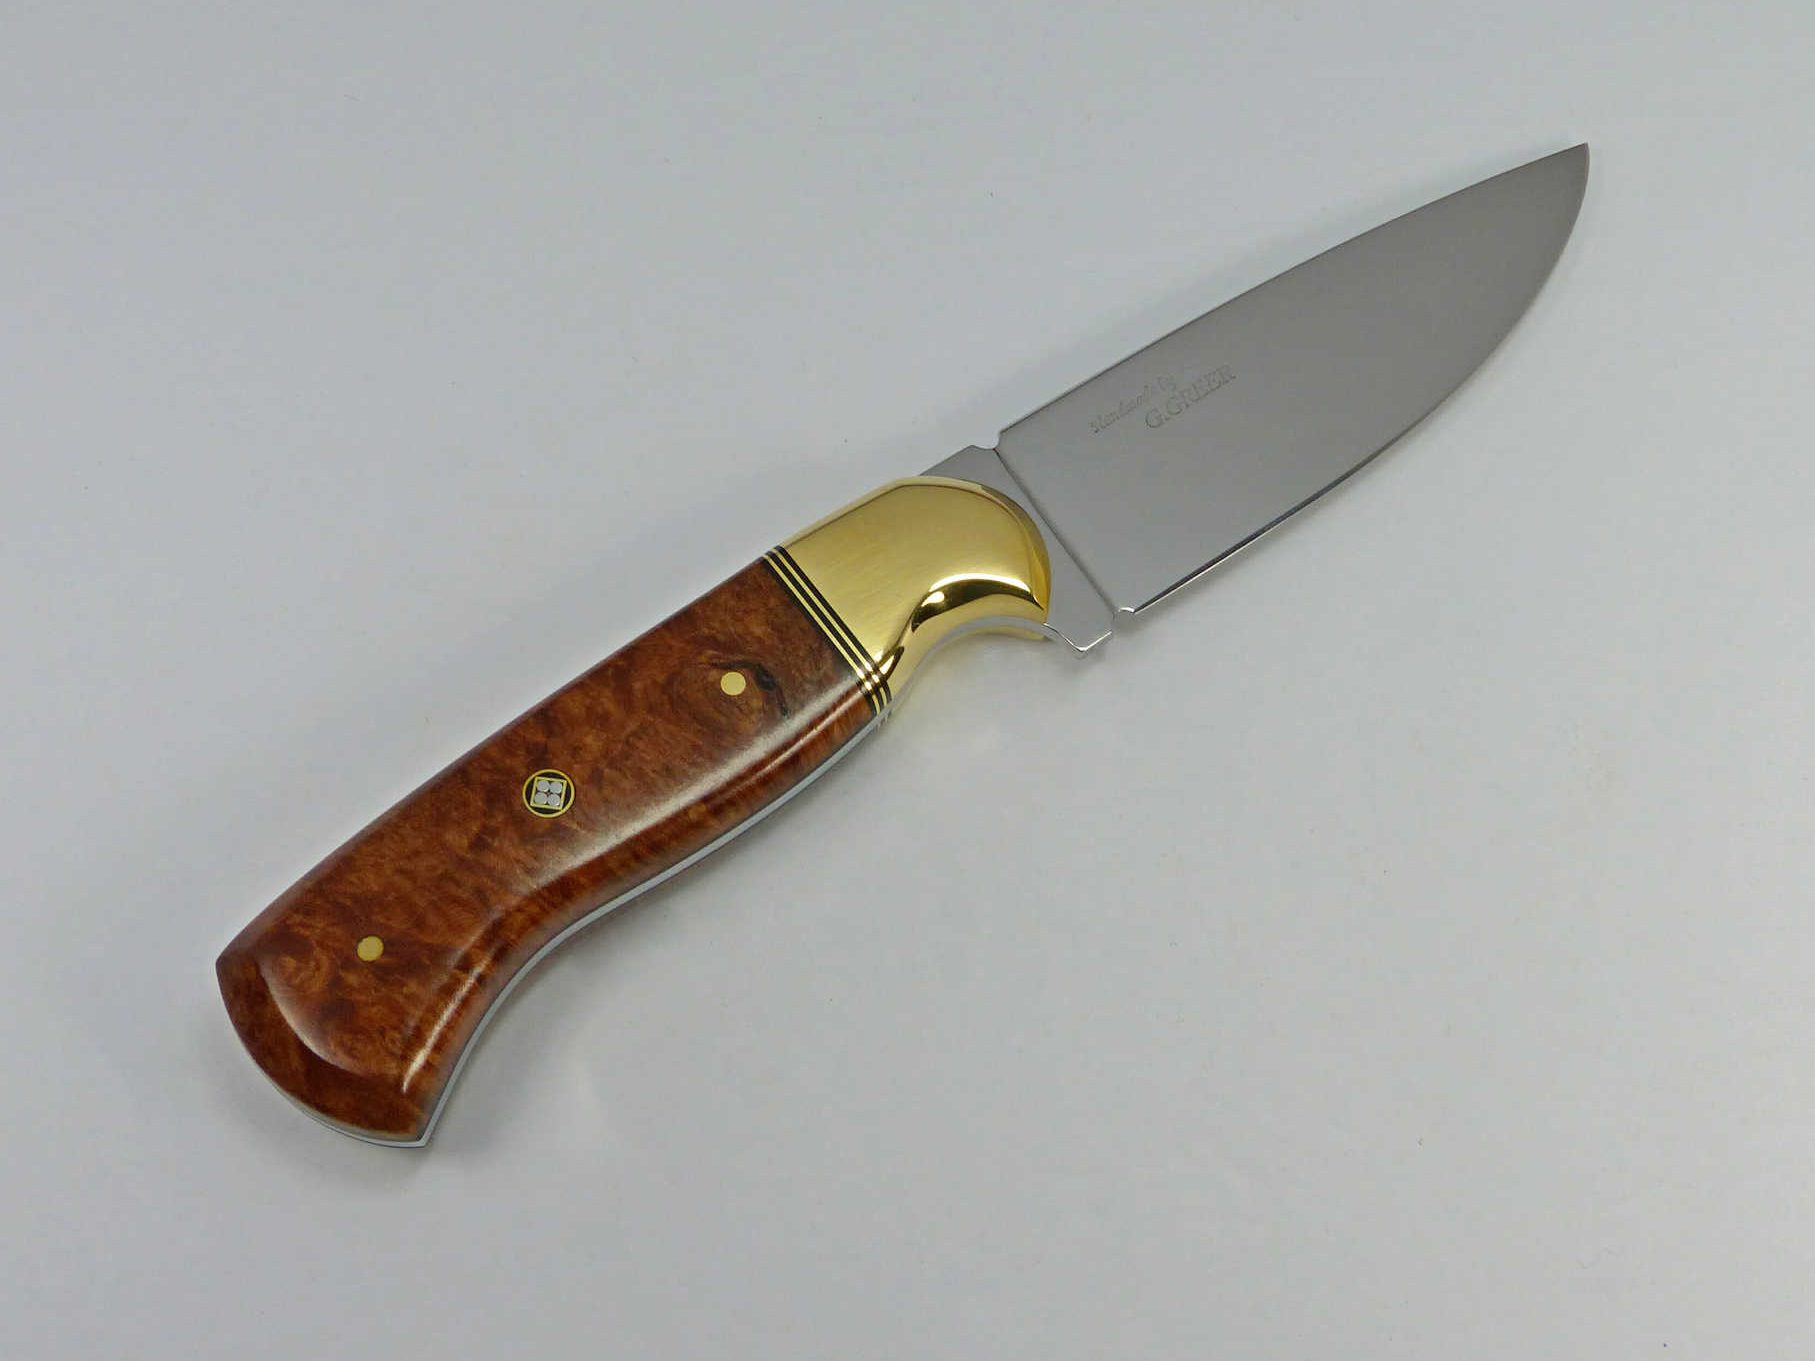 Canadian handmade show knife with beautiful brown elm wood handle and brass bolsters